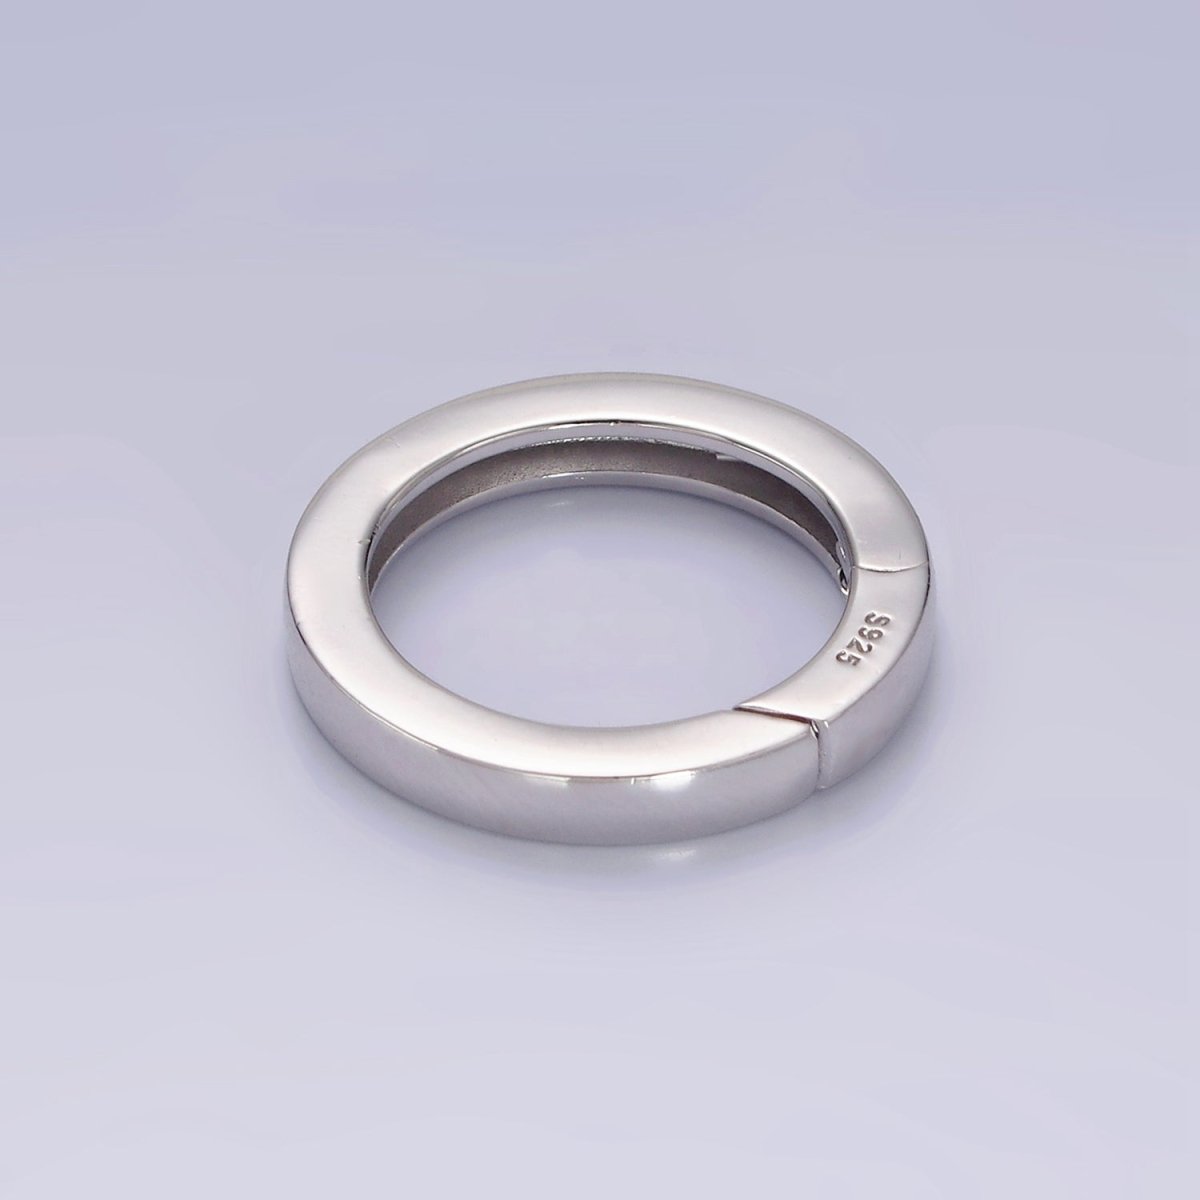 25mm Snap ring clasp 925 Sterling Silver Spring Gate Ring Push Gate ring Charm Holder ring hoop-Key chain Jewelry chain clasps-Trigger Clasp SL-387 - DLUXCA